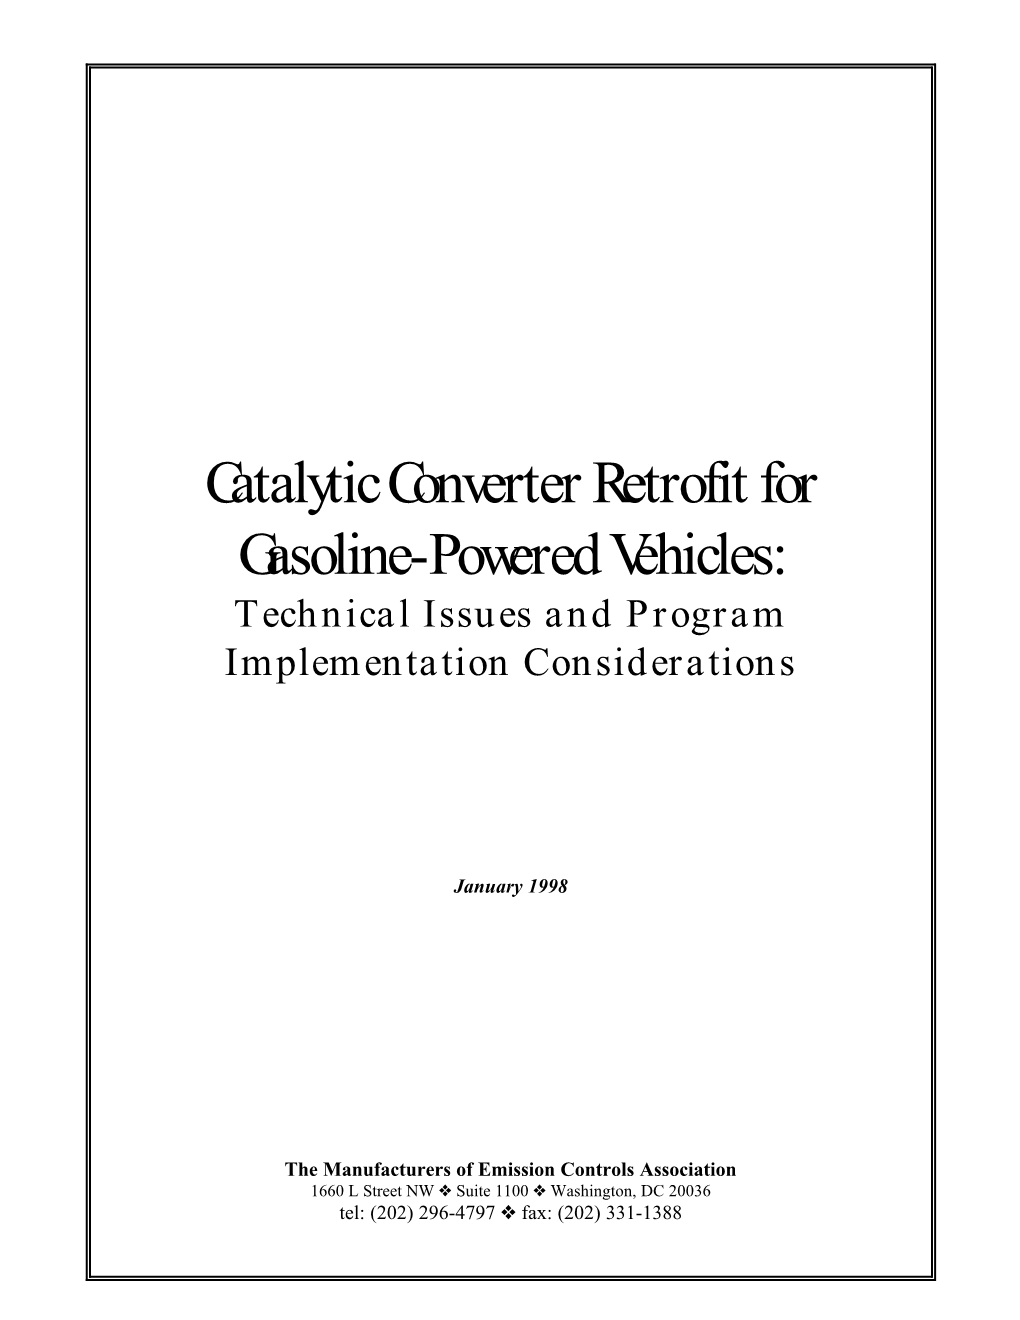 Catalytic Converter Retrofit for Gasoline-Powered Vehicles: Technical Issues and Program Implementation Considerations